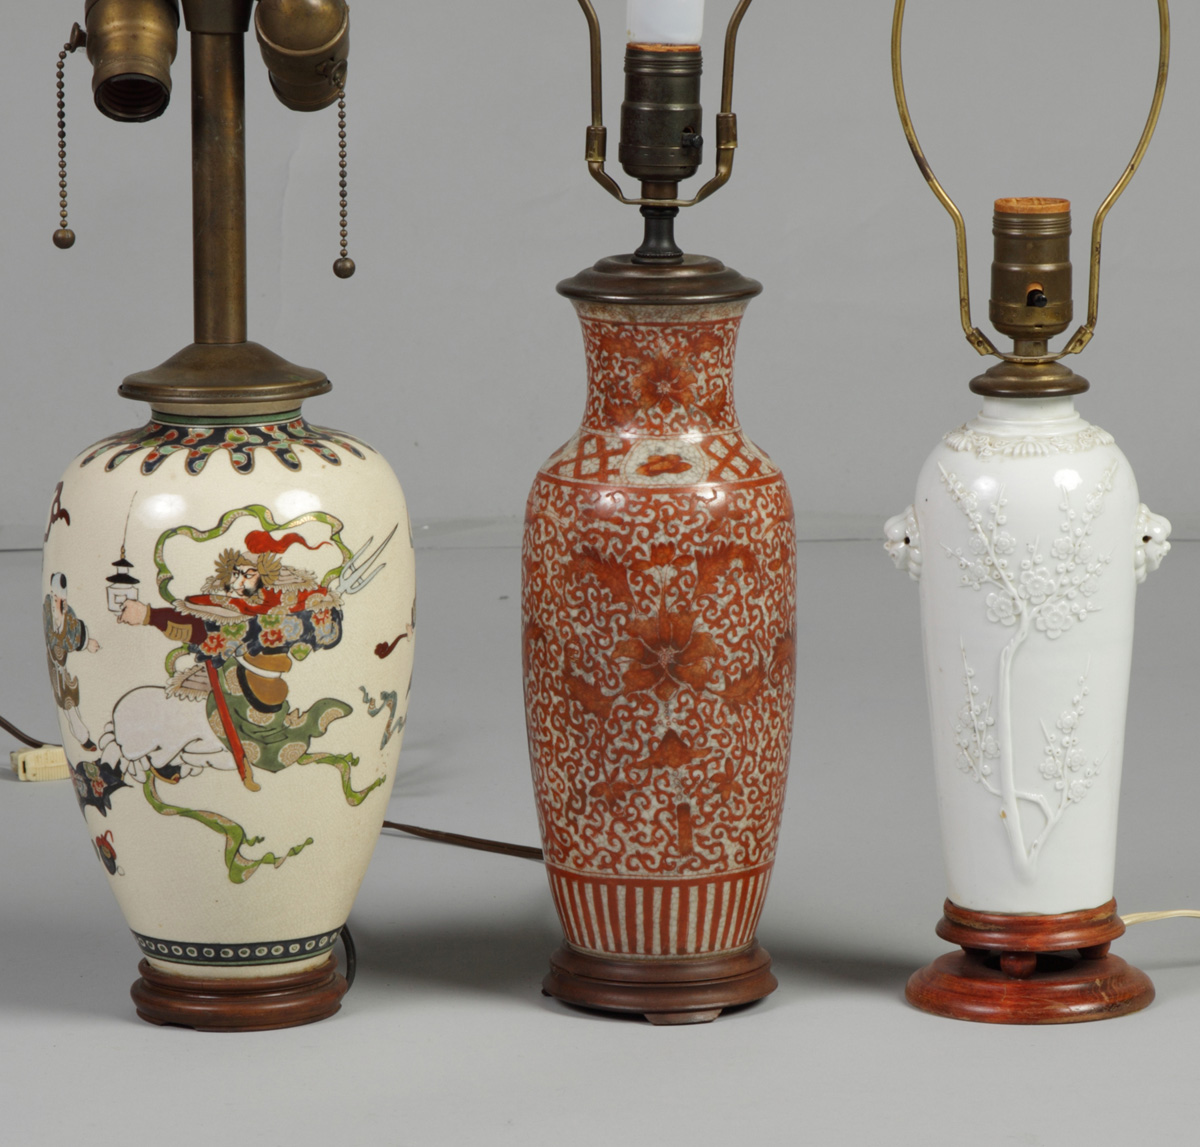 3 Oriental Lamp Bases One on left